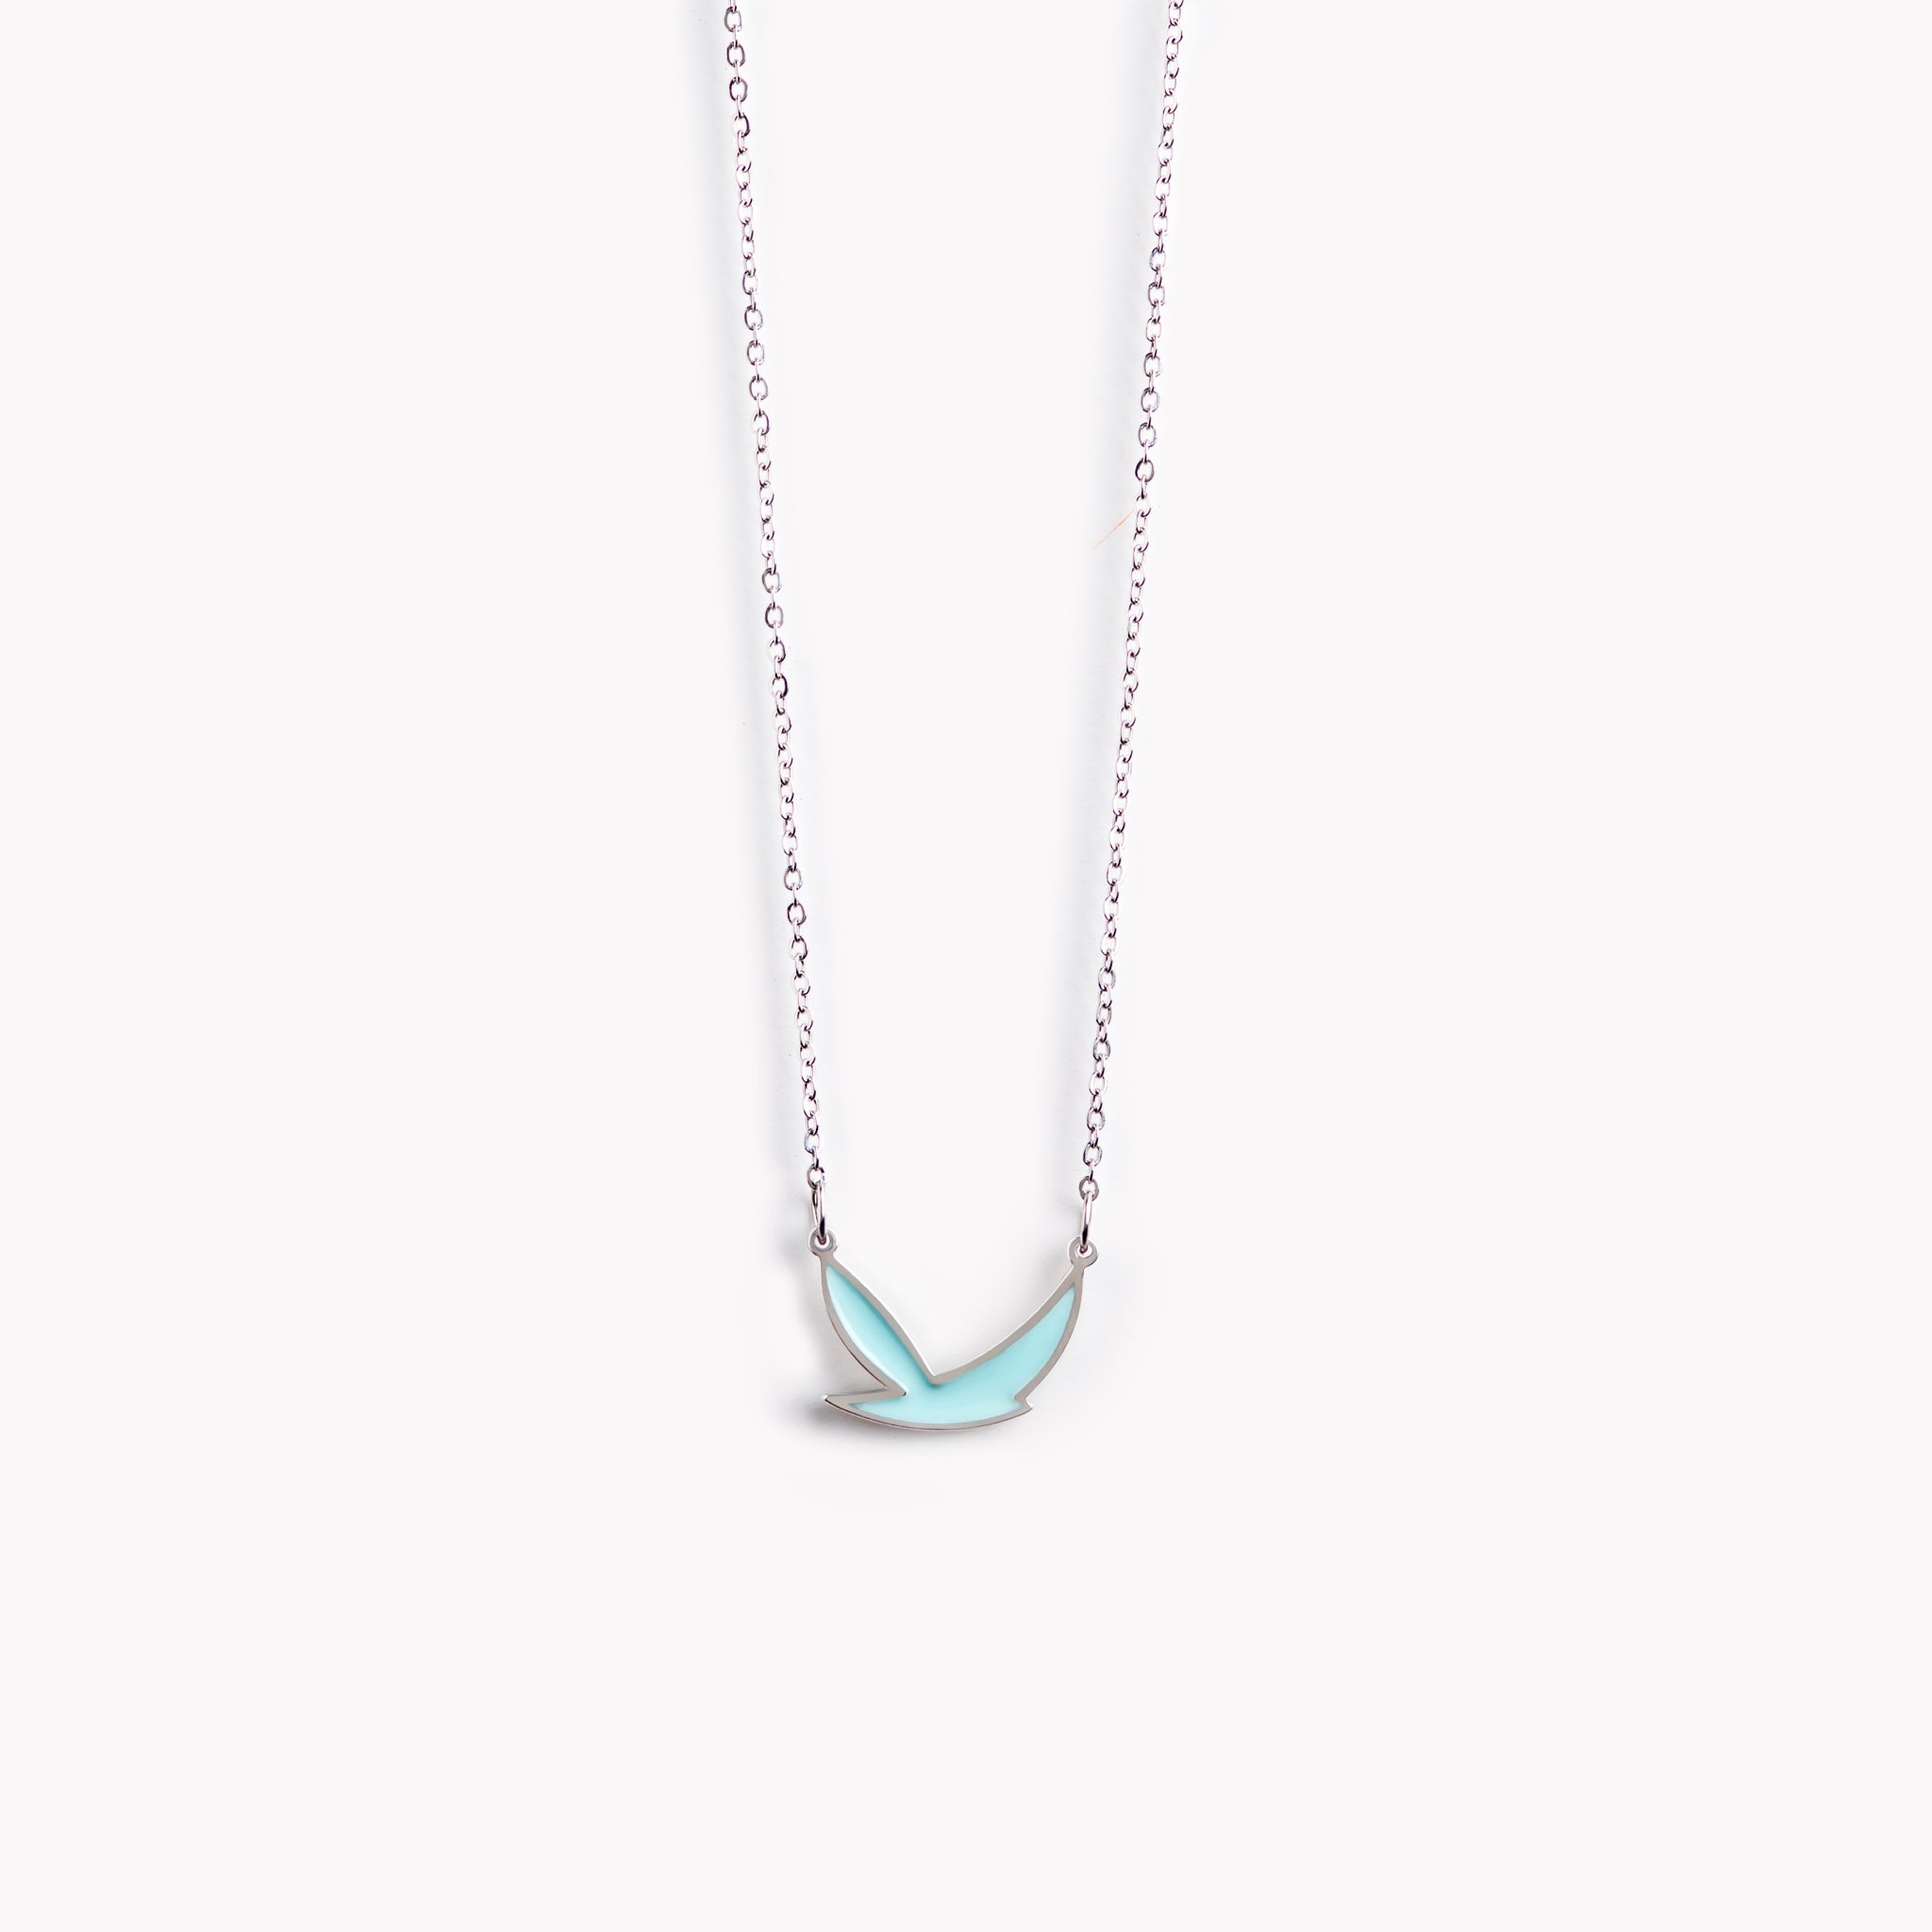 A simple, stylish, and dynamic turquoise bird necklace.